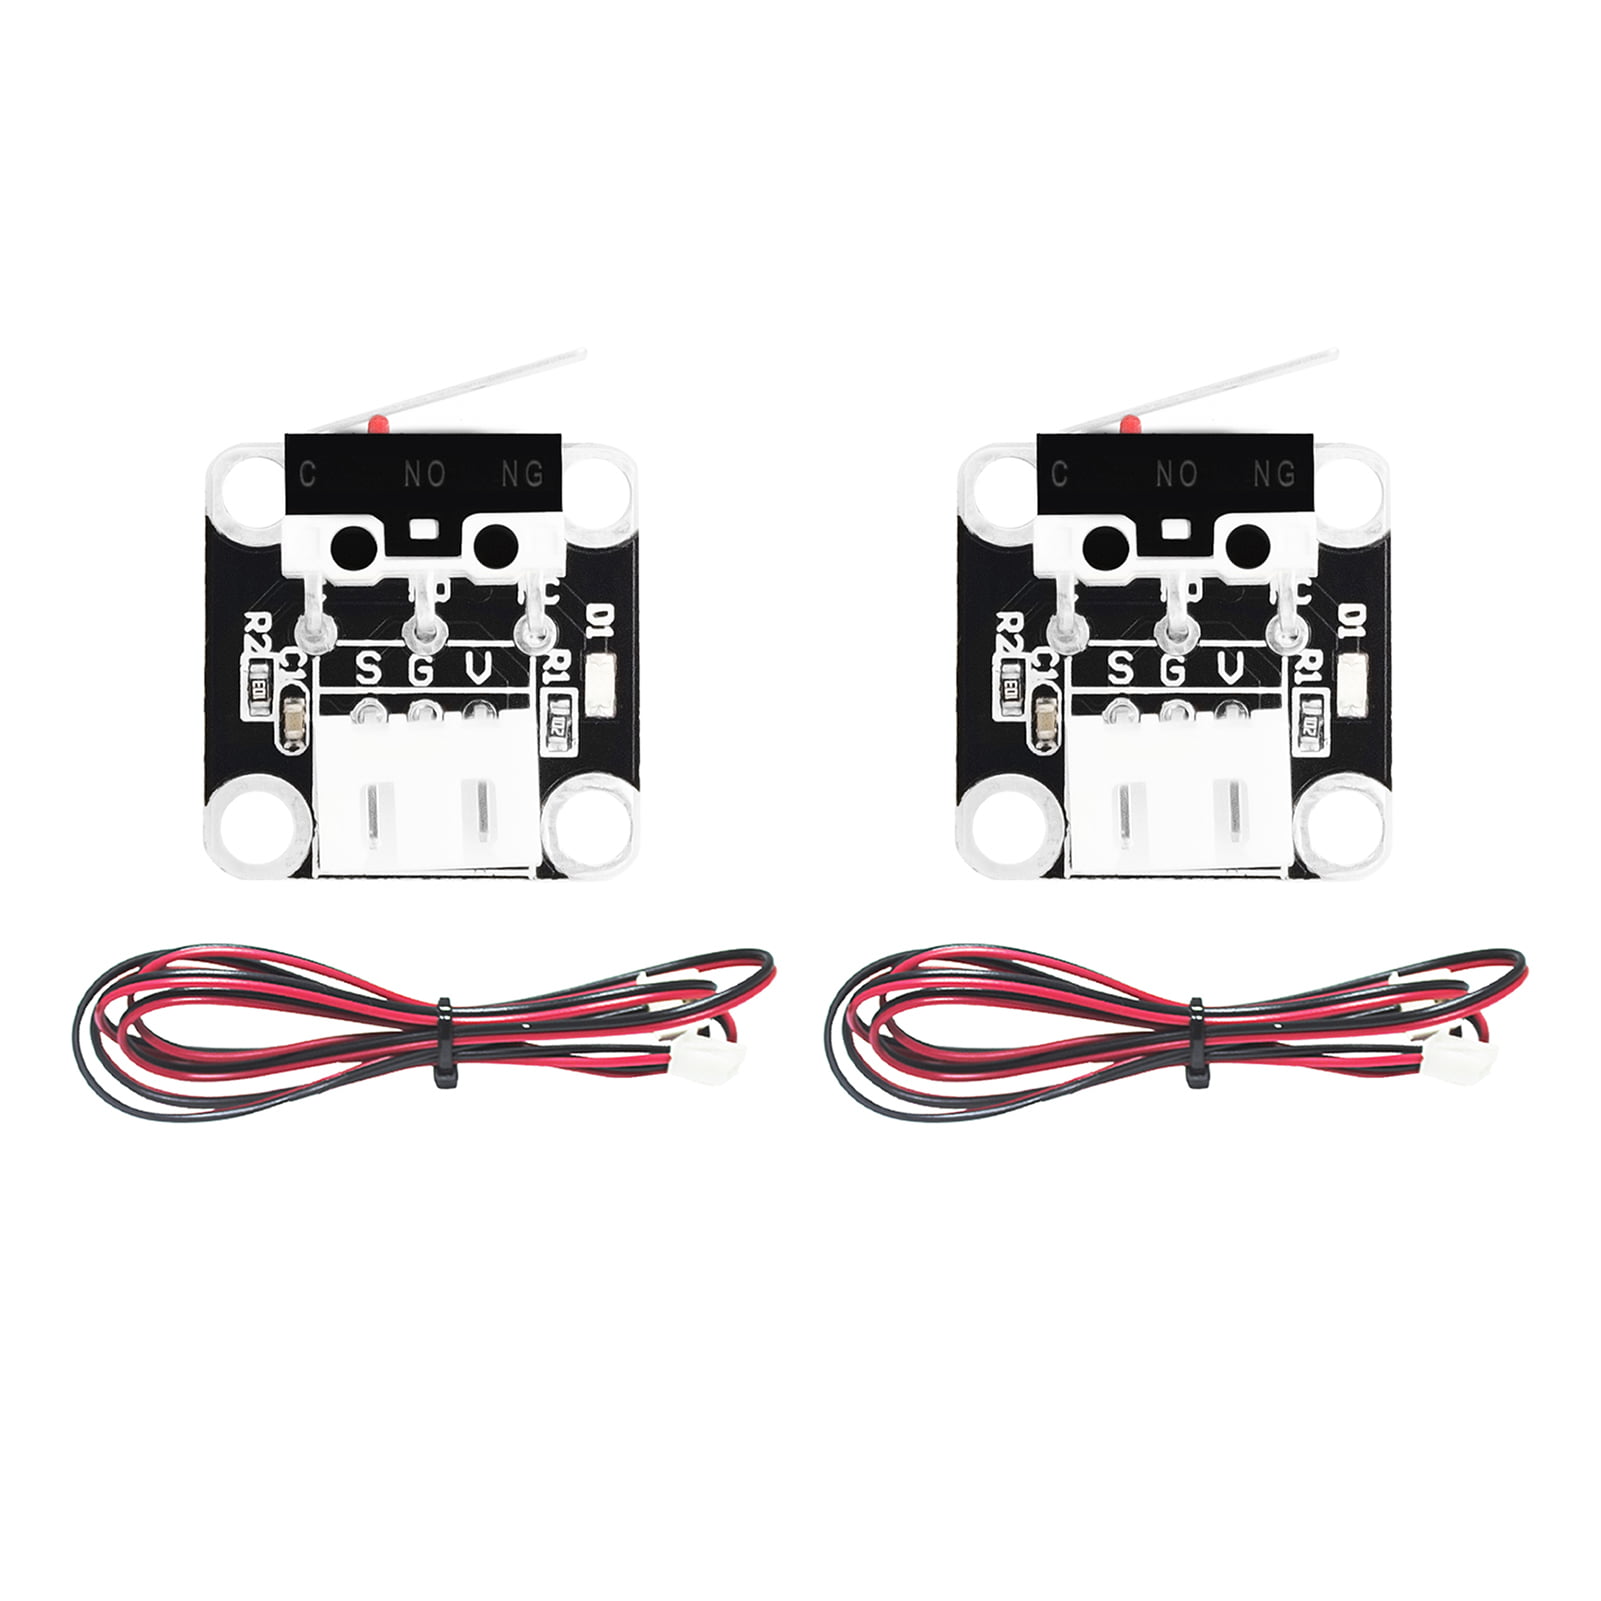 3D Printer Accessories Endstop Stop Switch Sensor With Cables for Ender 3 